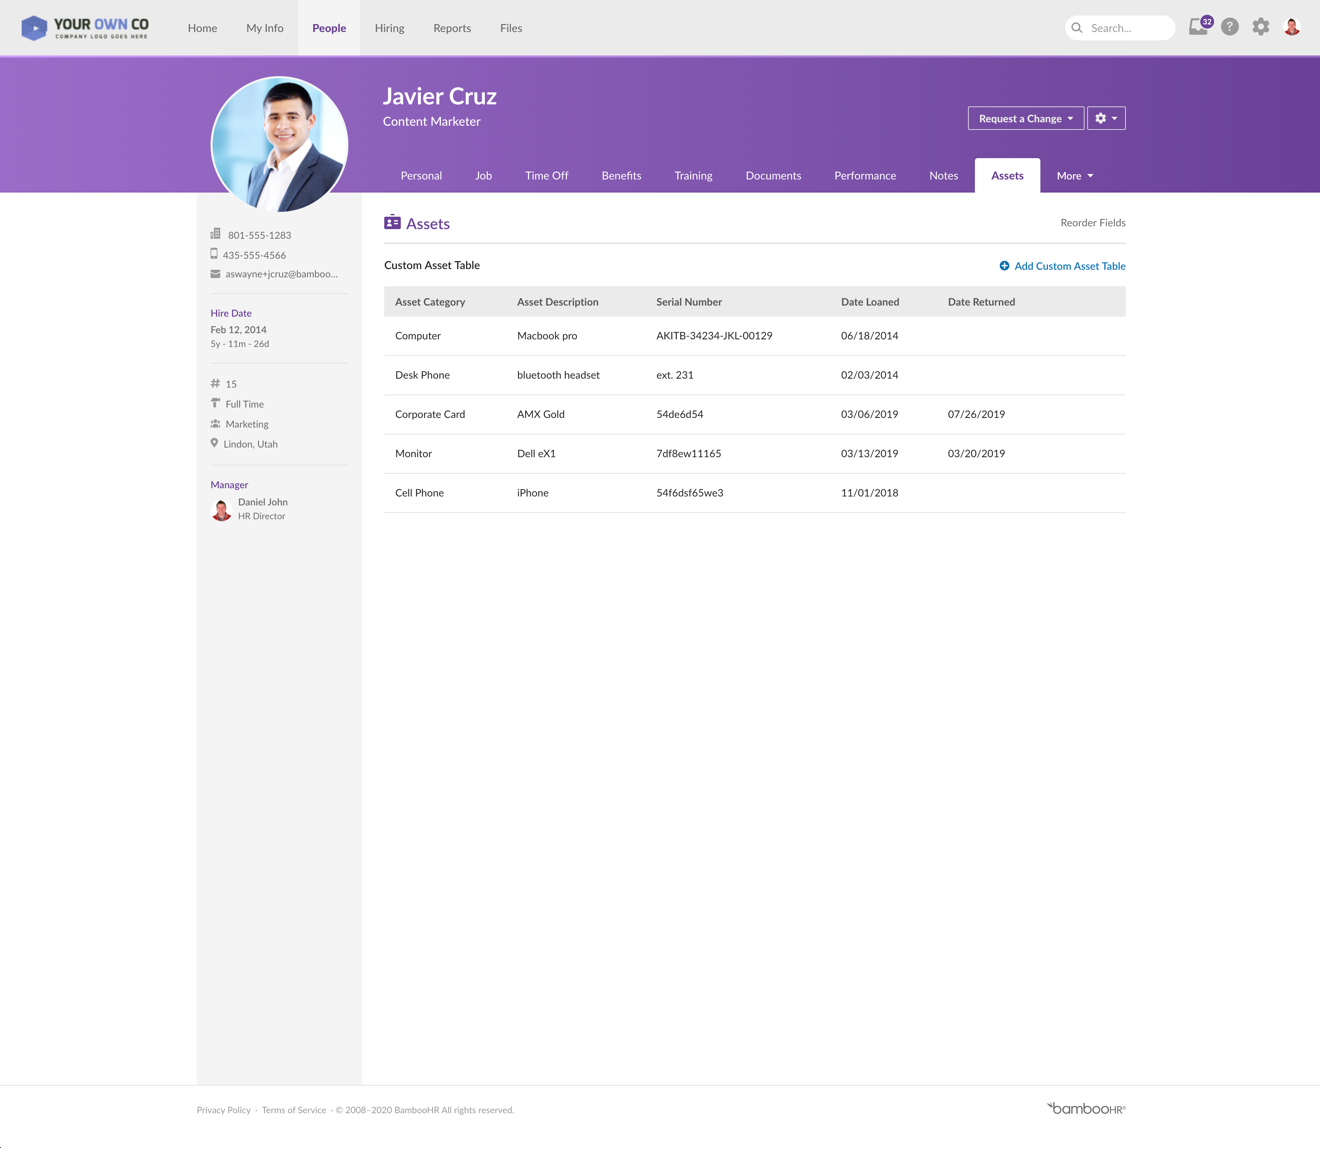 Employee Management Software Employee Records Made Easy Bamboohr